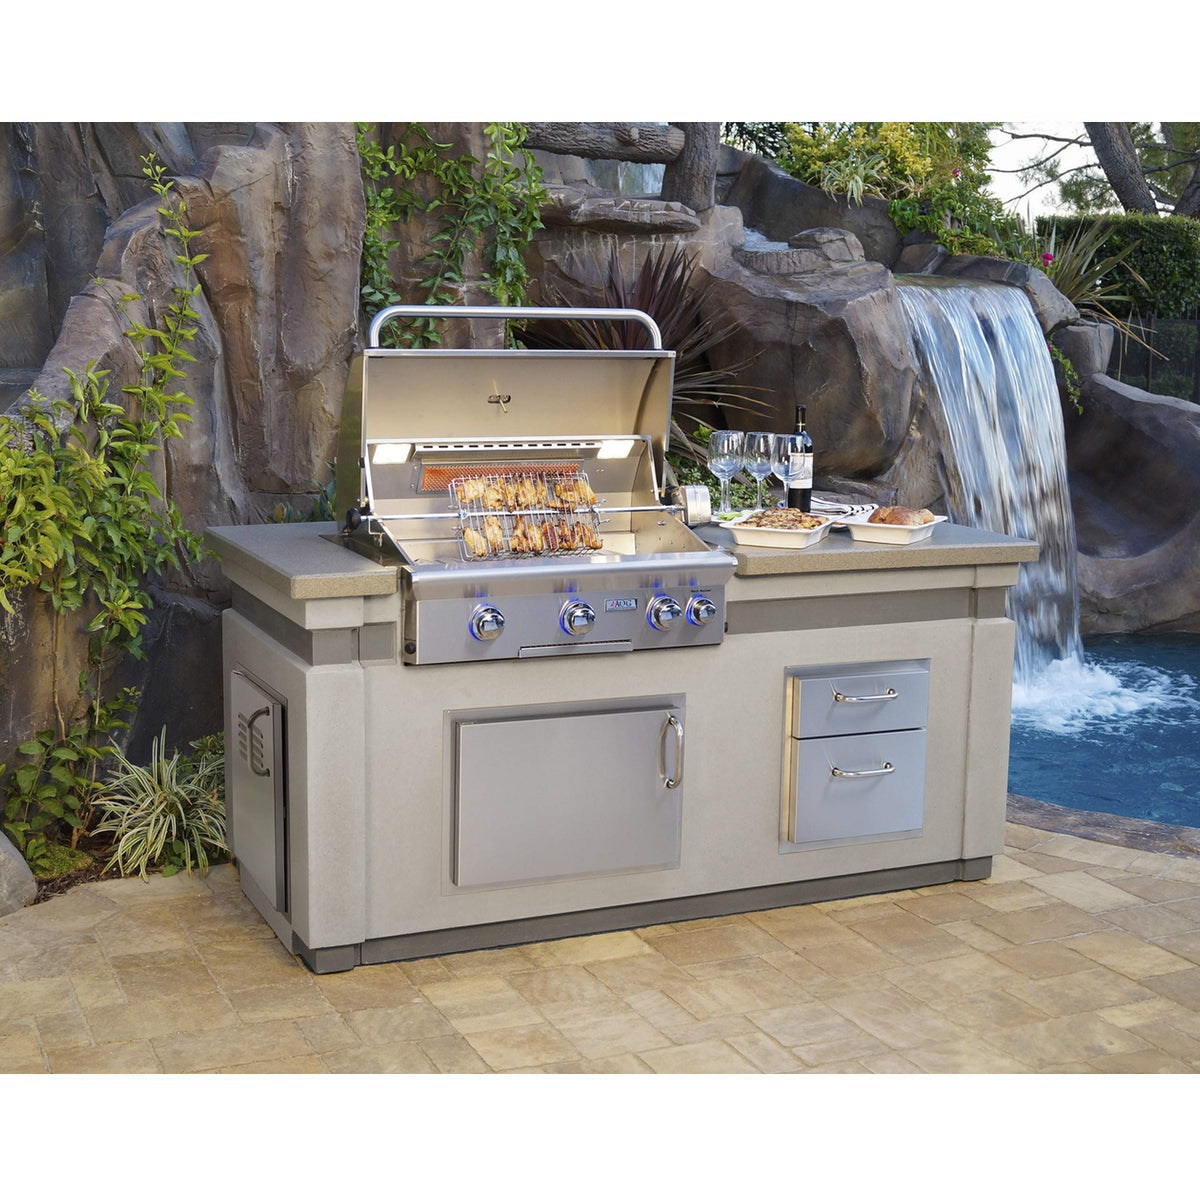 American Outdoor Grill 6 Foot BBQ Island With L Series 30 Built In Gr BetterPatiocom